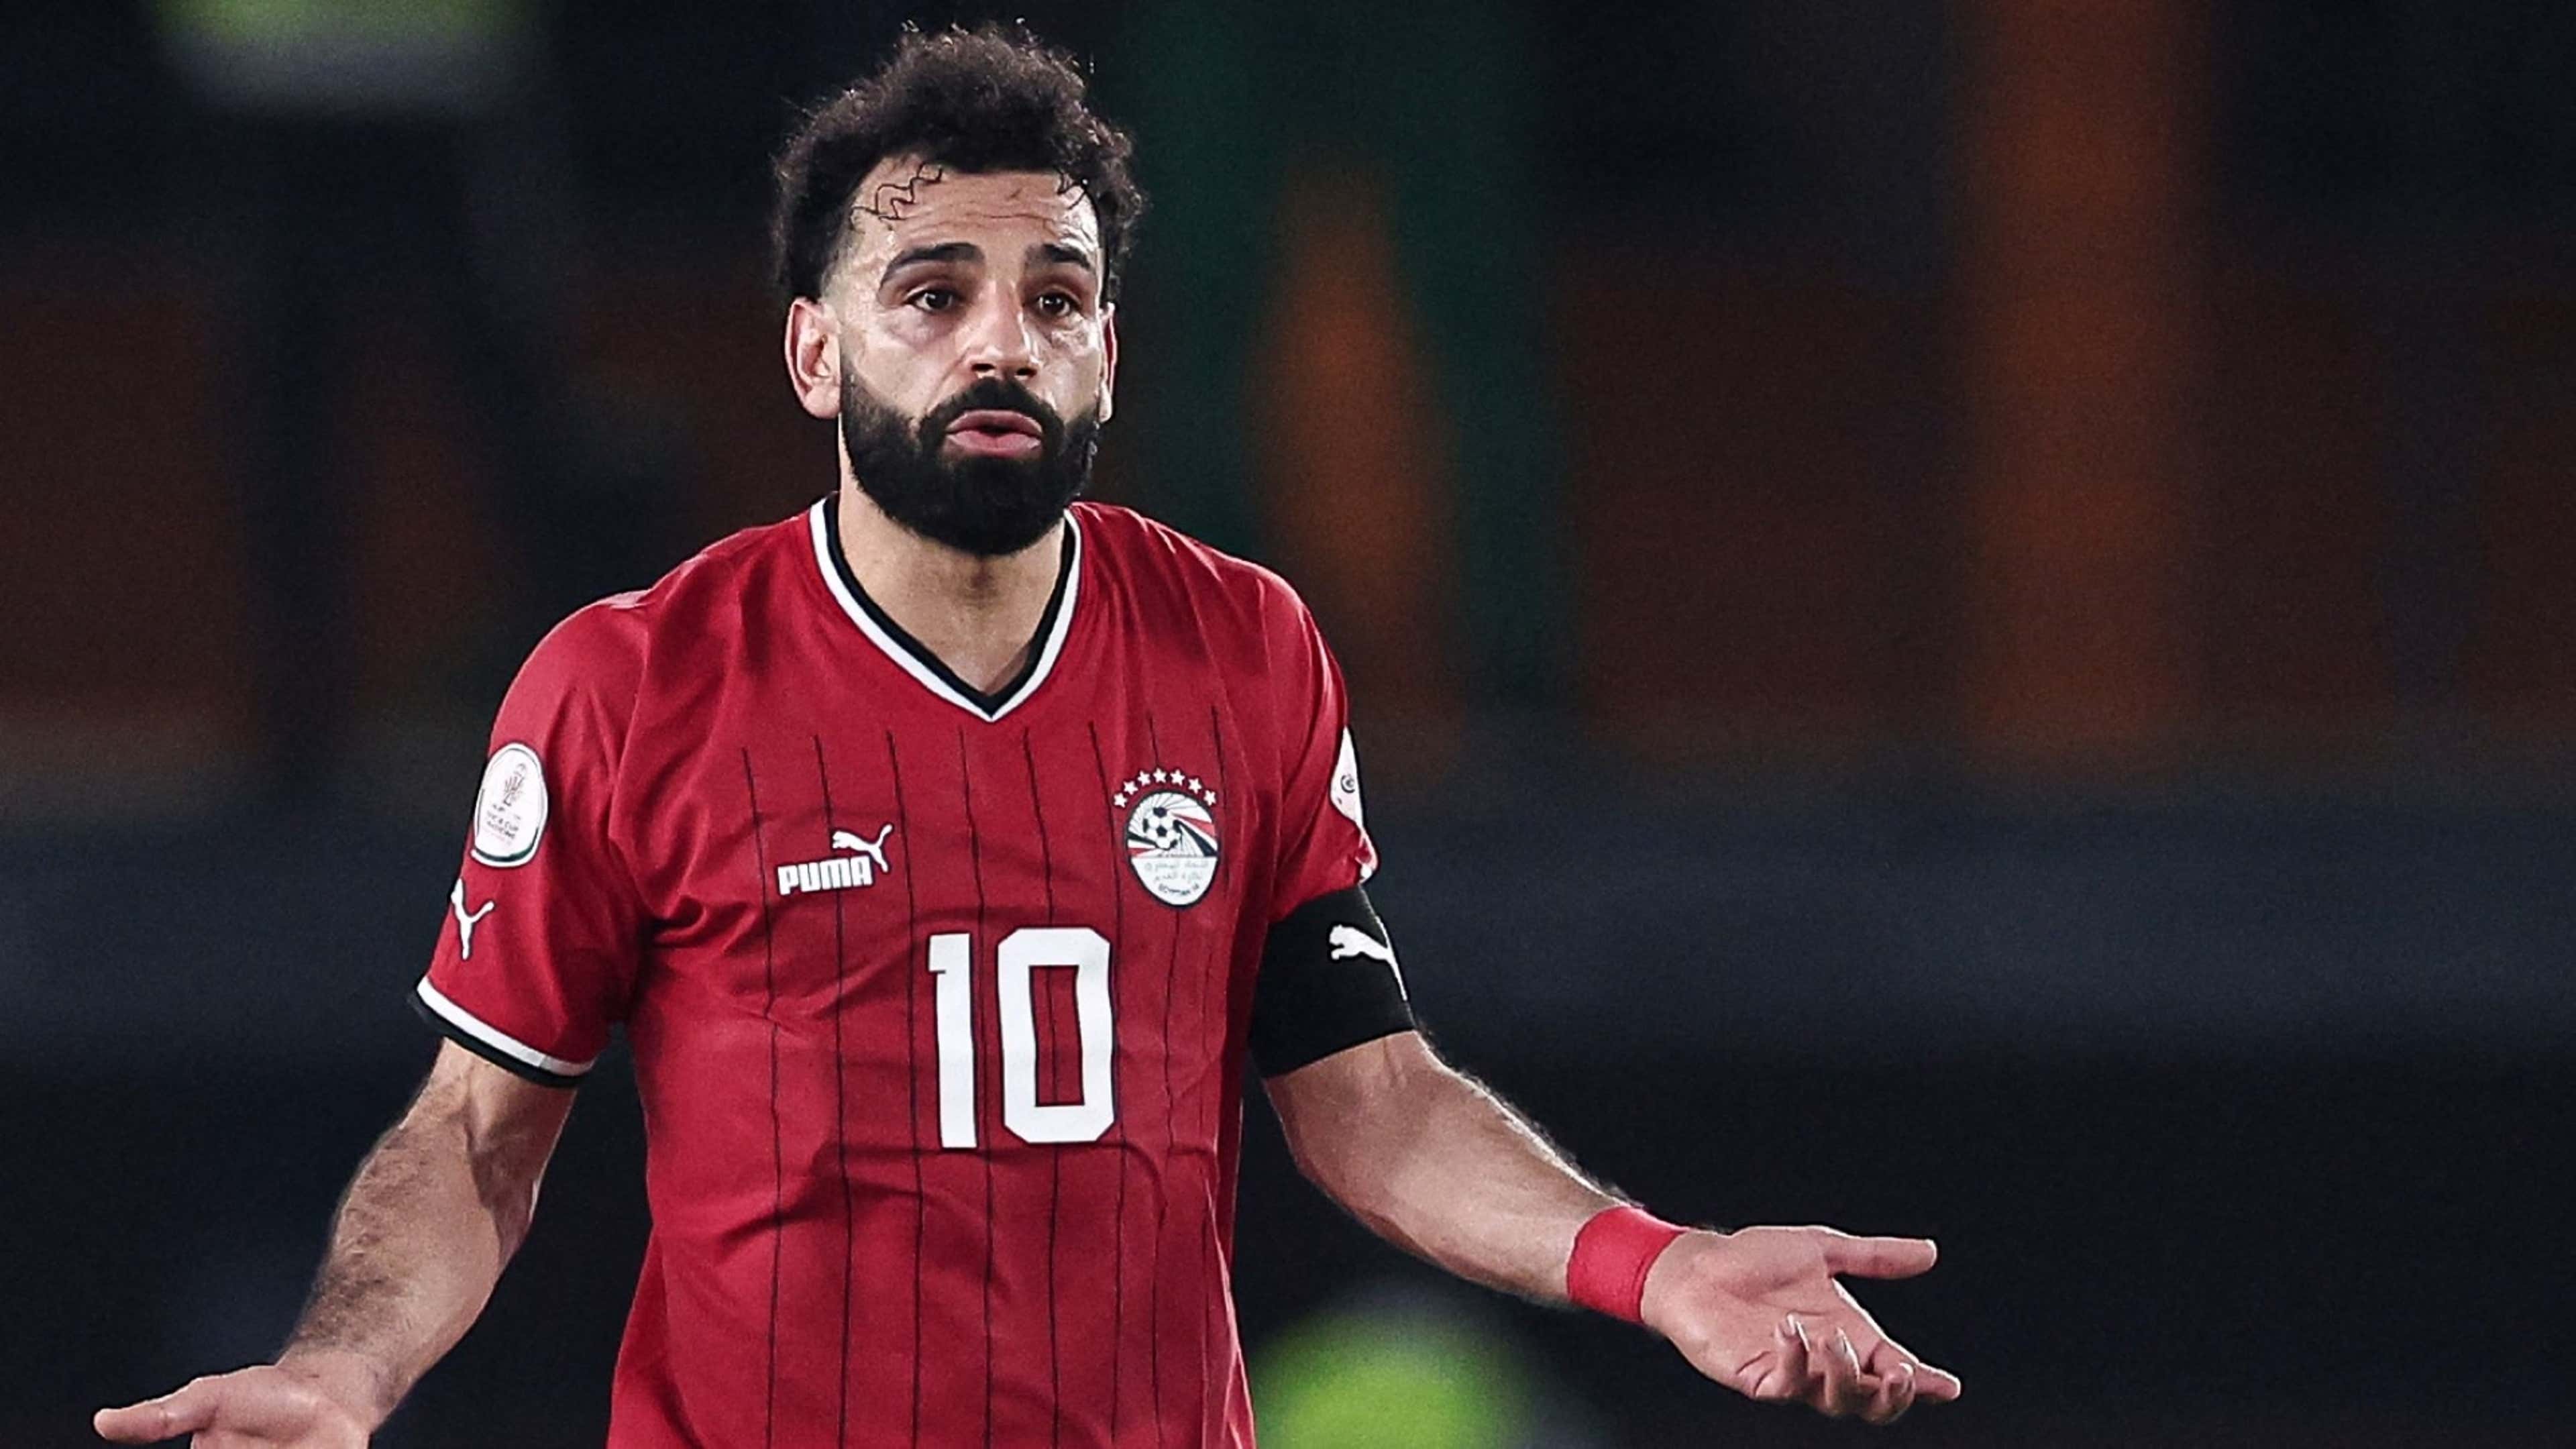 Agent of Liverpool star Mohamed Salah provides worrying injury update.